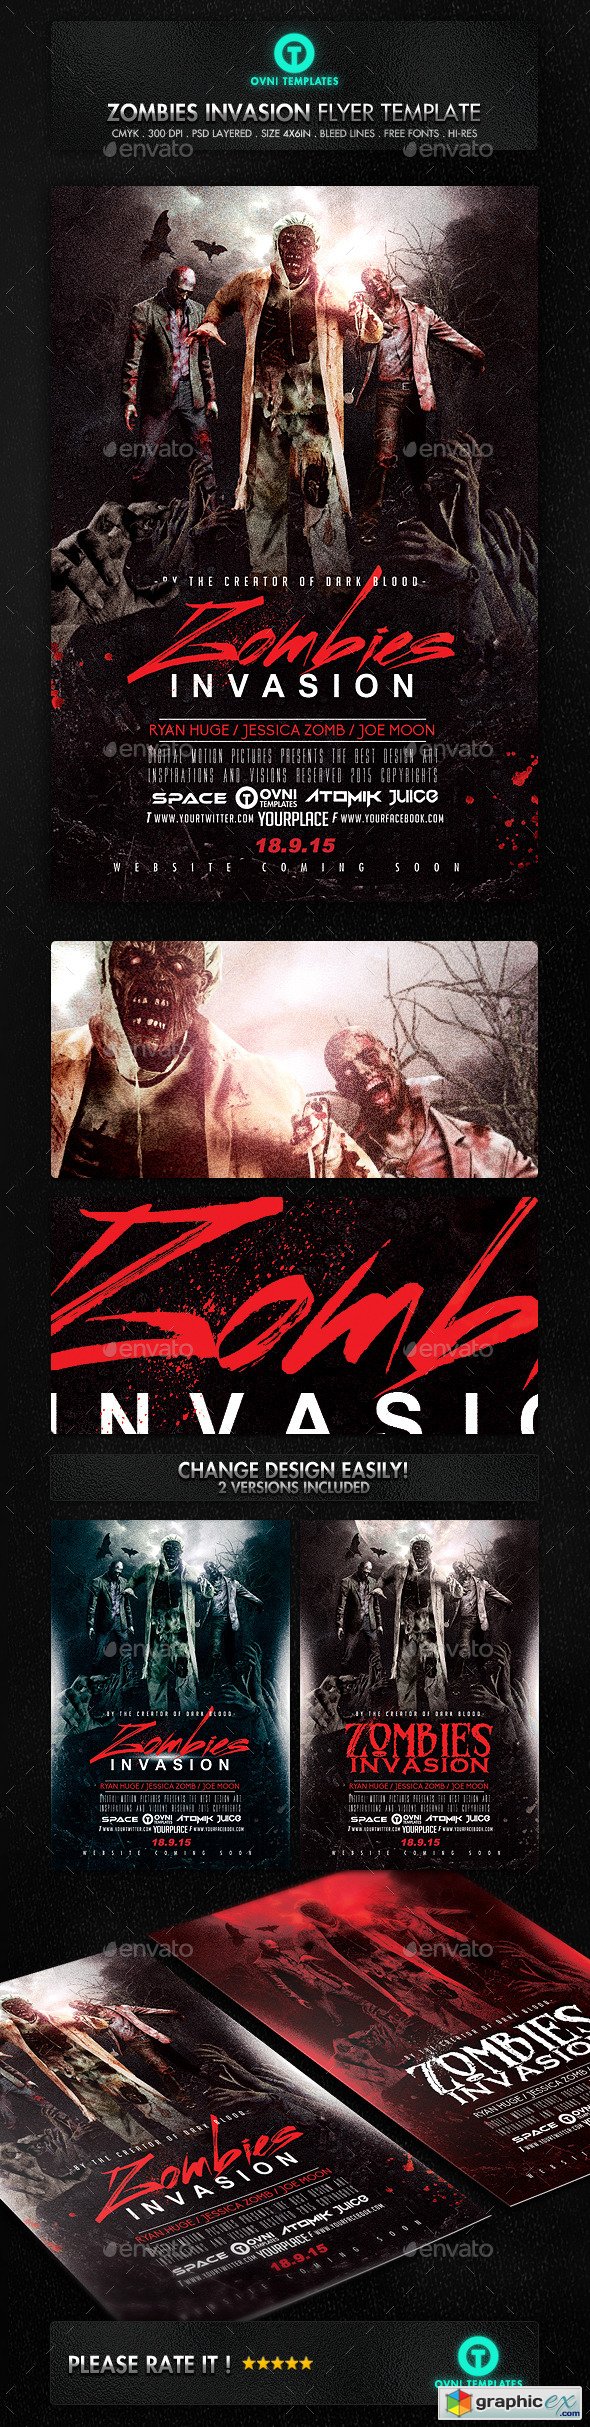 Zombies Dead Invastion Flyer Template